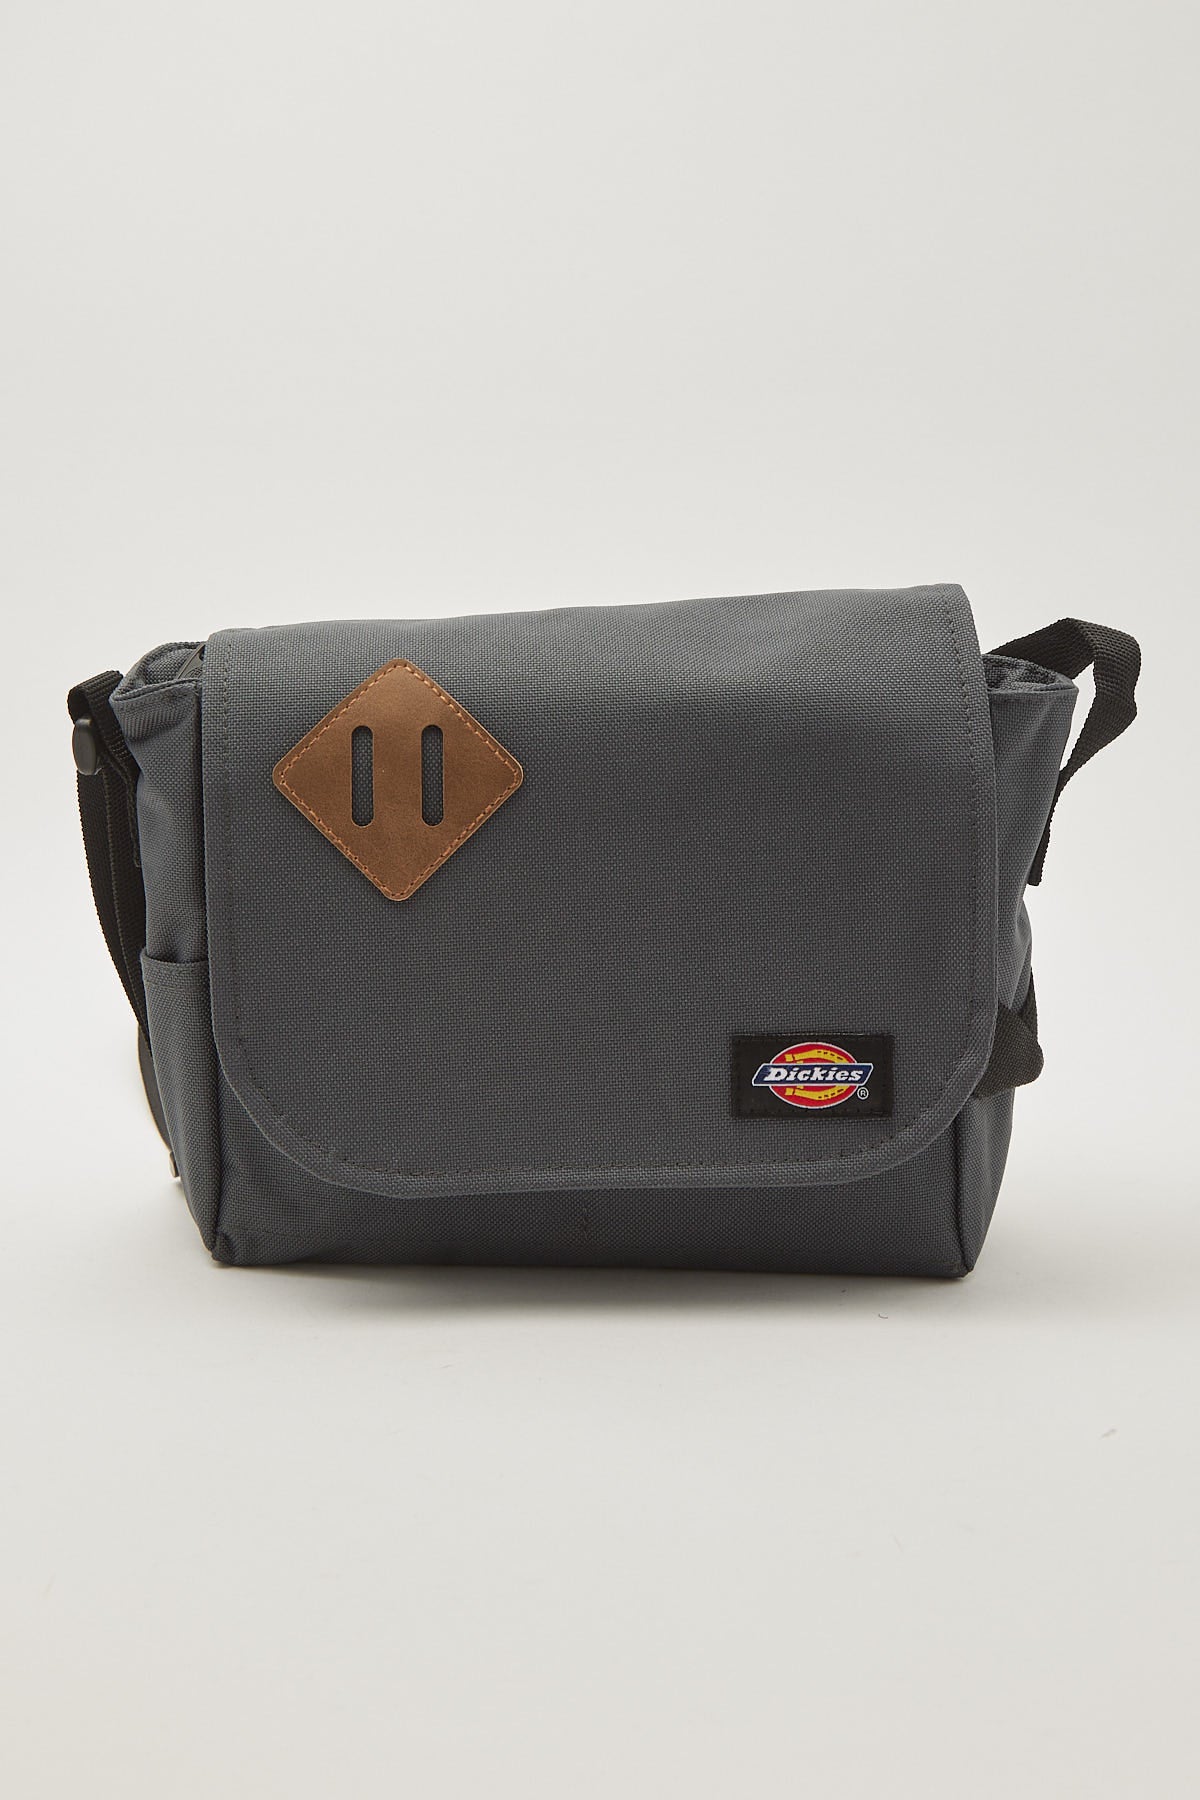 Dickies Courier Satchel Charcoal